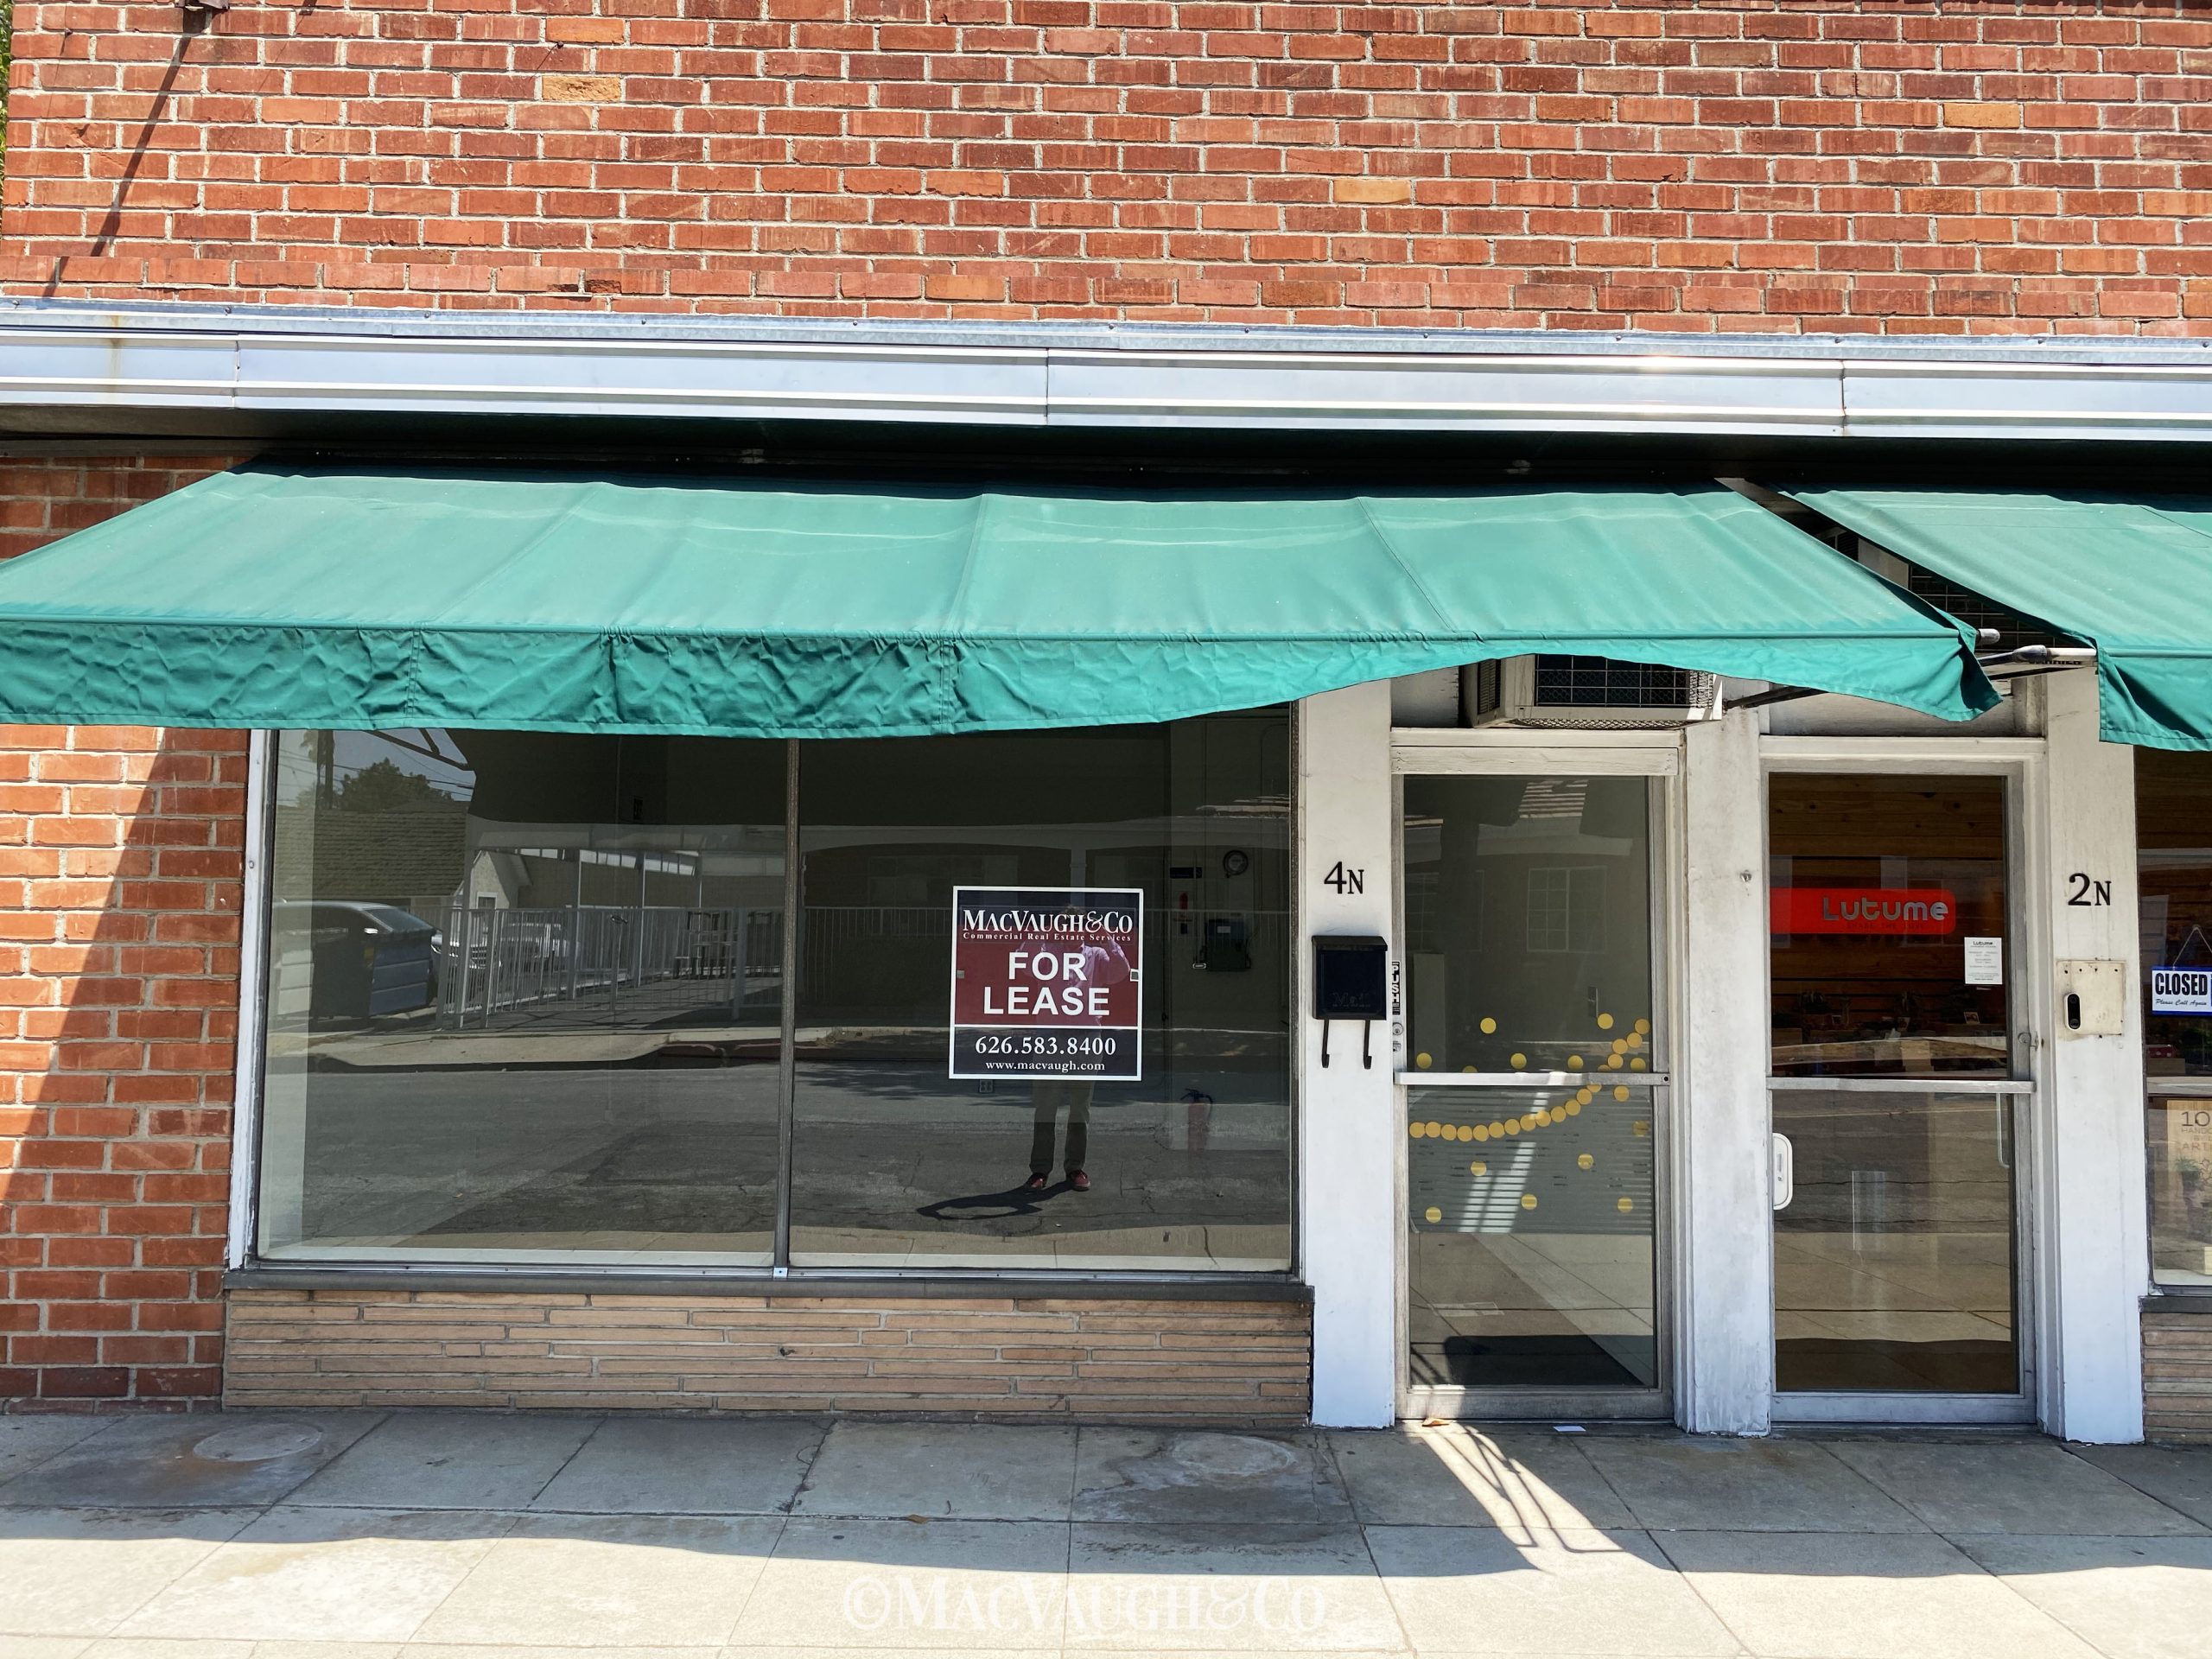 Corner Retail for Lease